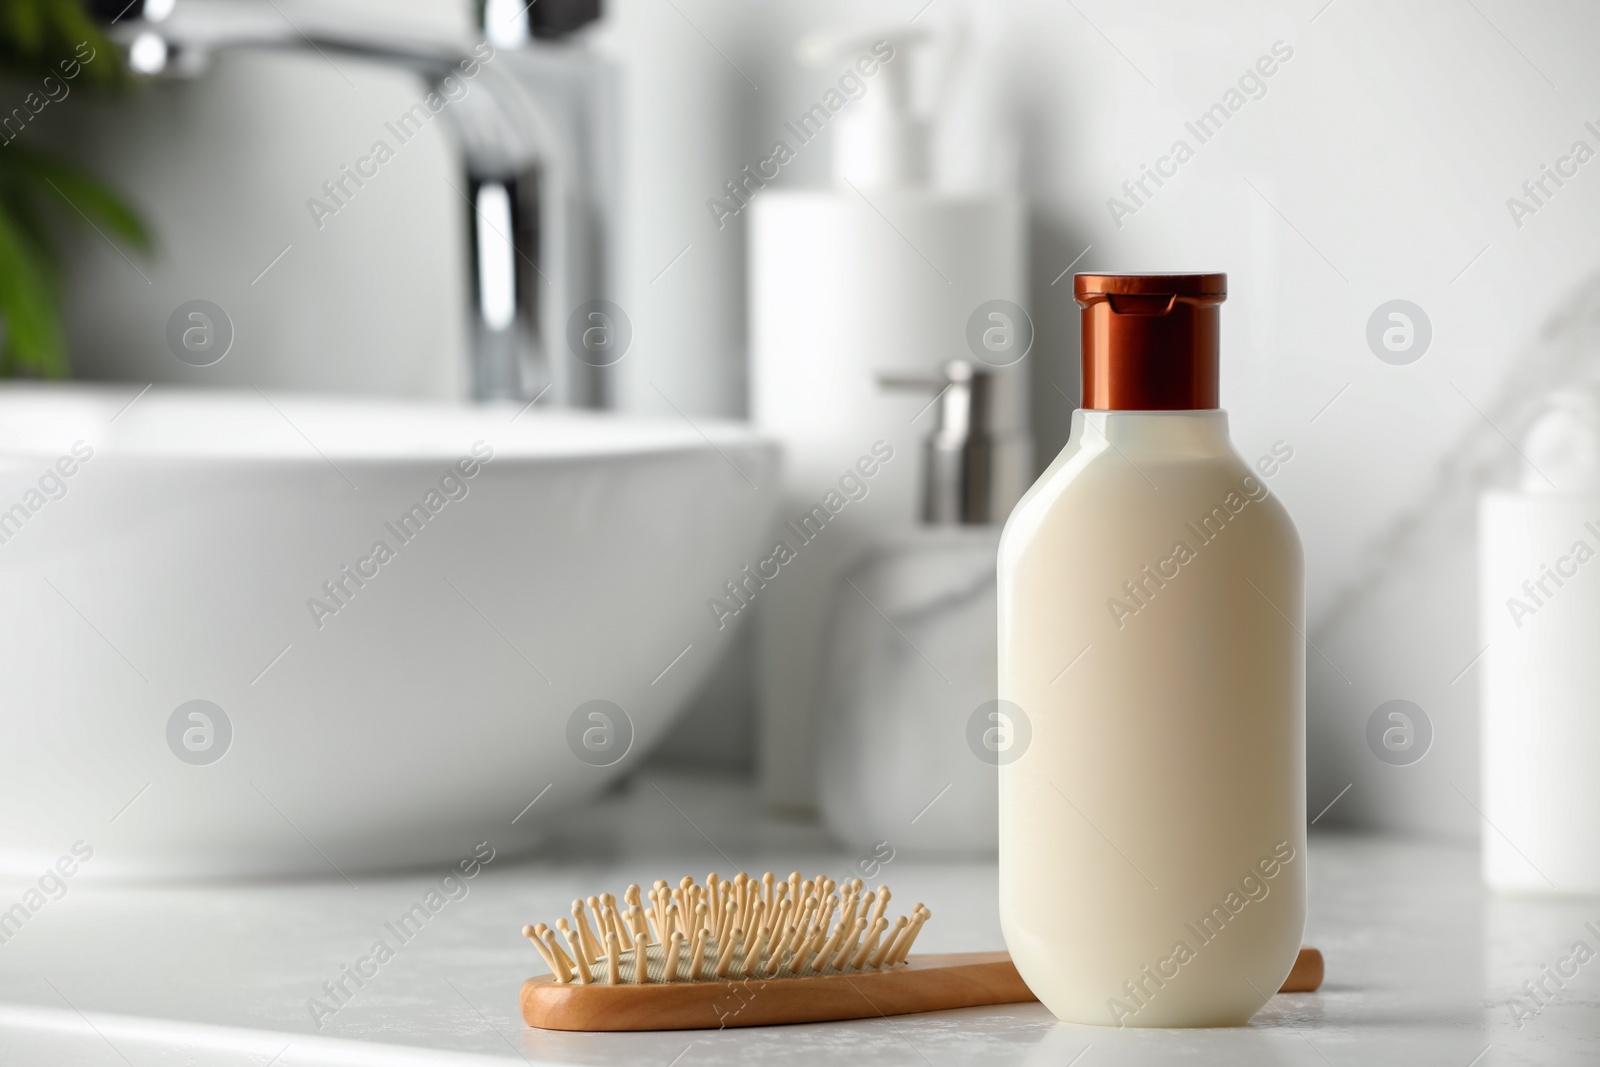 Photo of Bottle of shampoo and wooden hairbrush near sink on bathroom counter, space for text